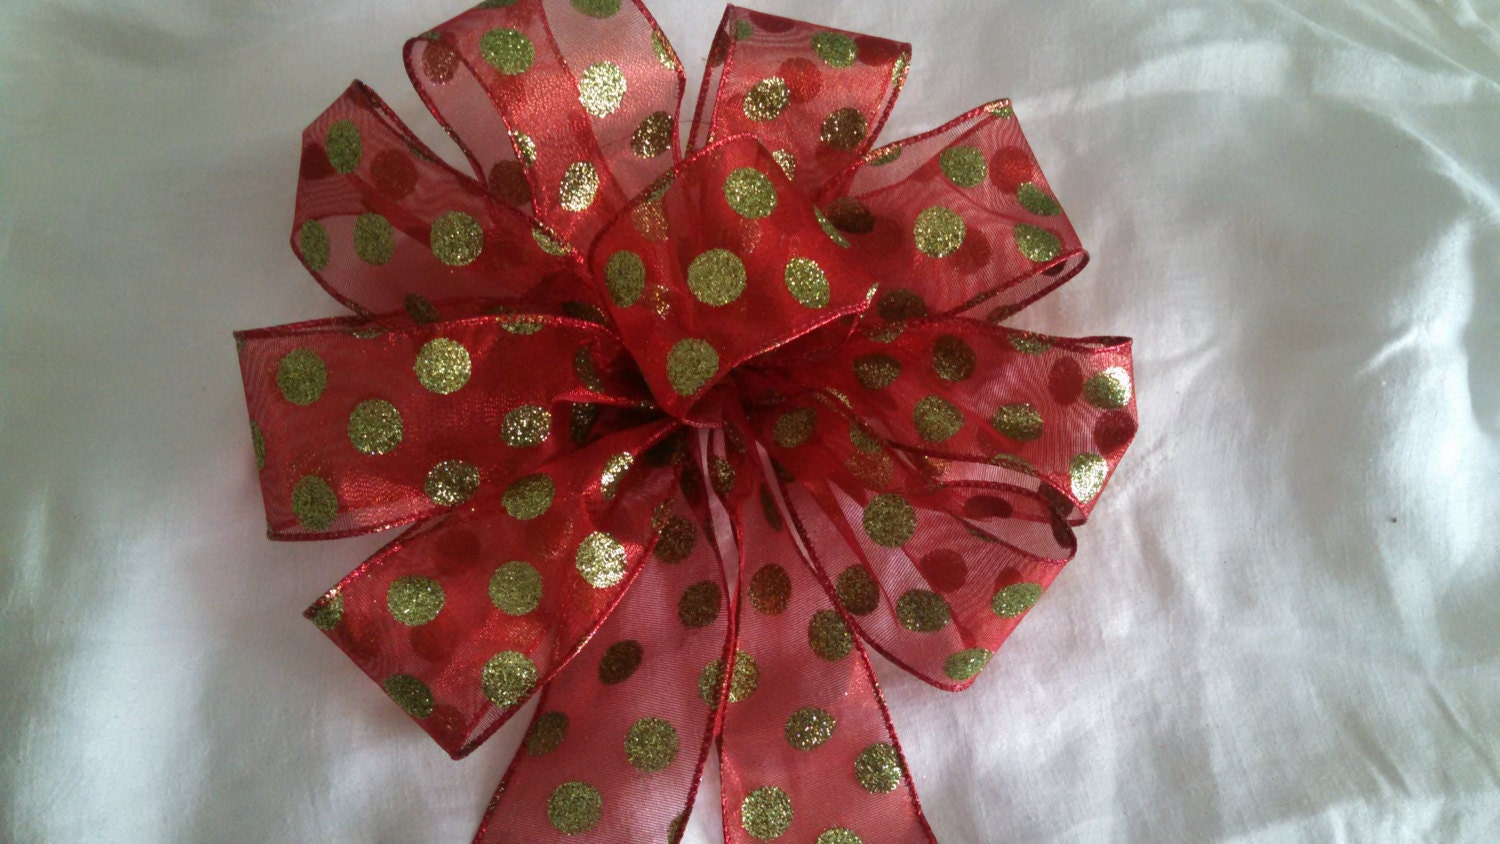 Red & Lime Green Polka dots Christmas Bow for Wreaths, Swags, Staircase, Fireplace, Home Decor, etc.